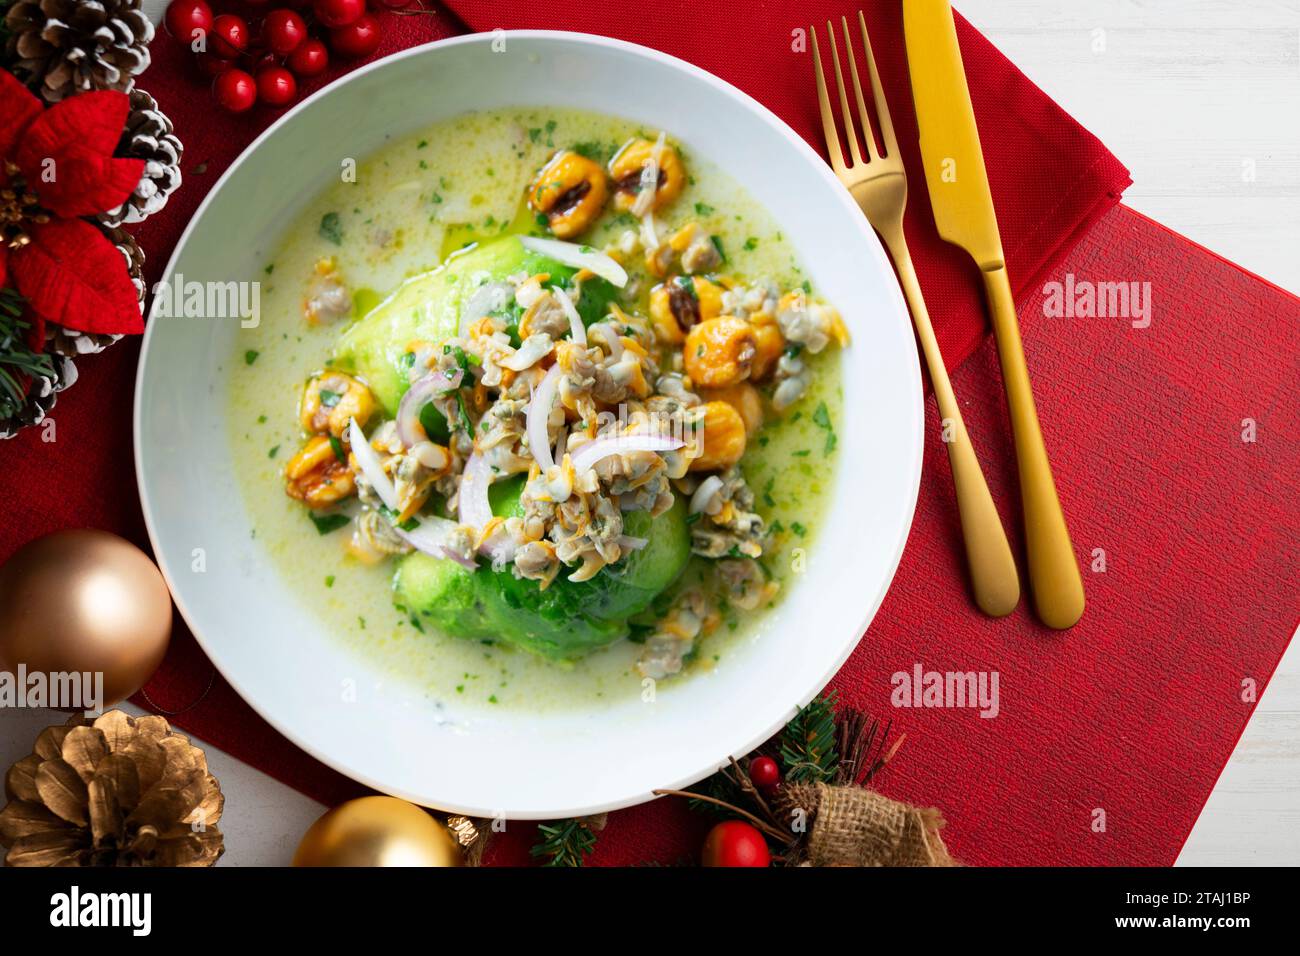 Ceviche with cockles and avocado. Christmas food served on a table decorated with Christmas motifs. Stock Photo